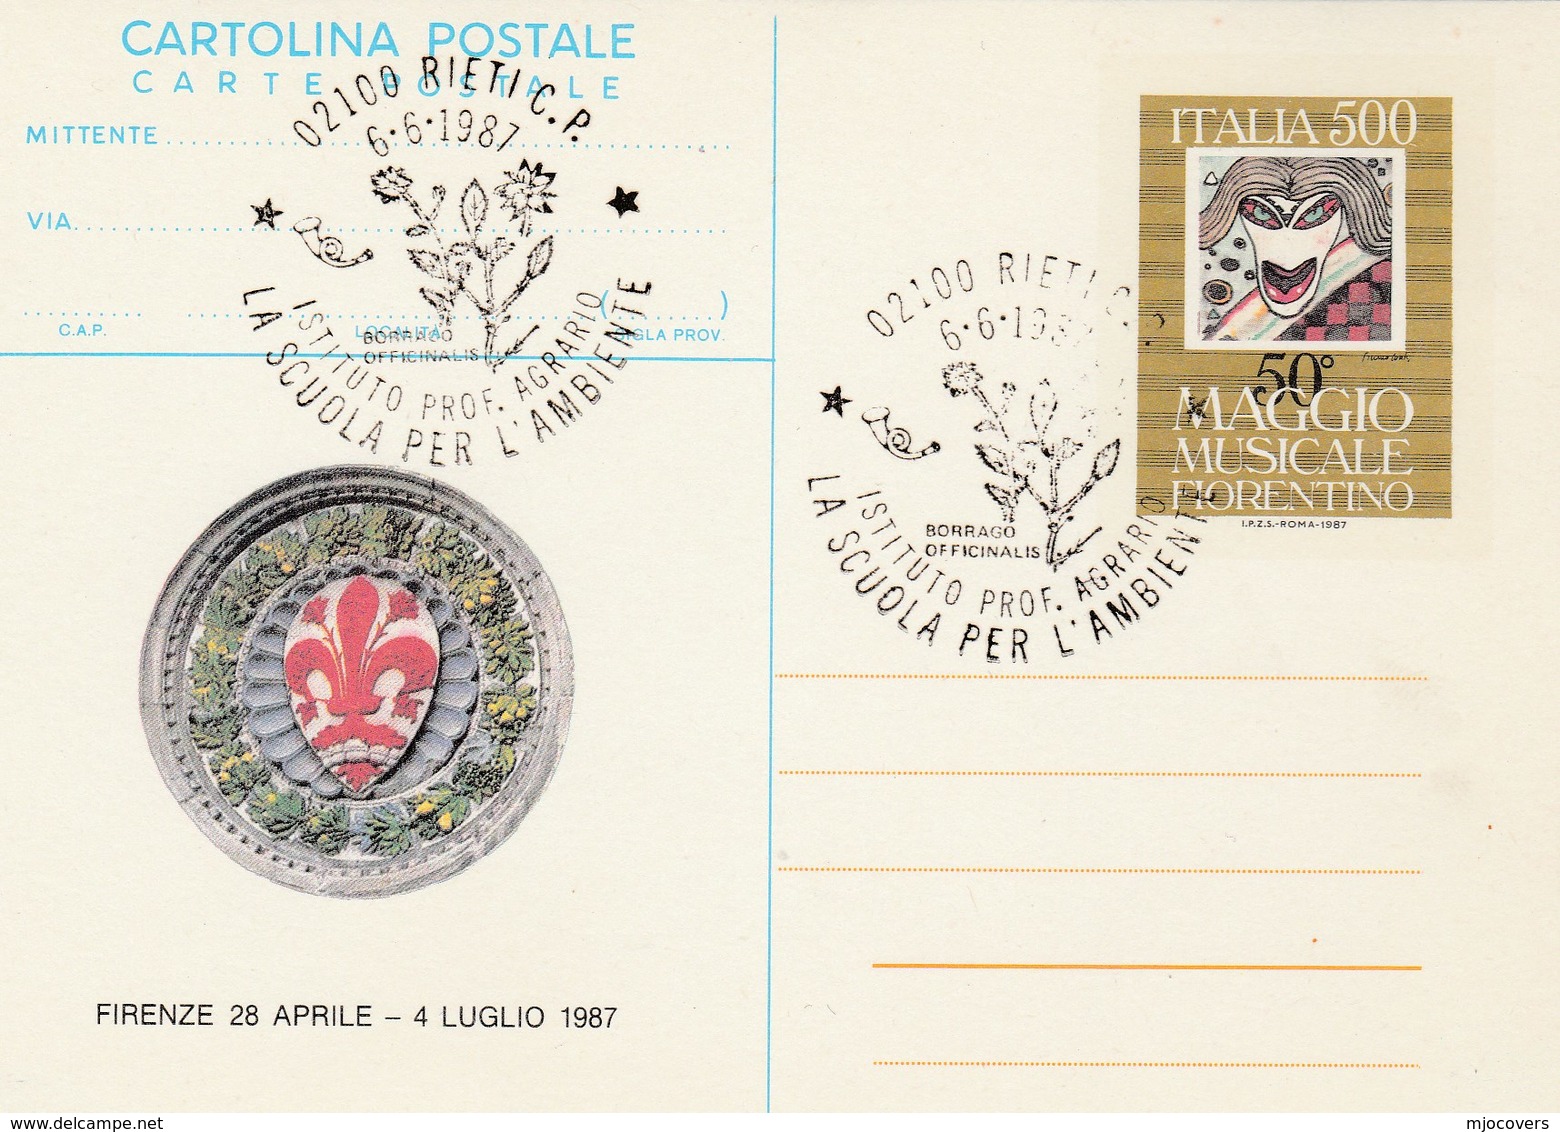 1987 Rieti AGRICULTURE ENVIRONMENT EVENT COVER  Card Postal Stationery Maggio Musicale Music Flower Flowers Stamps Italy - Environment & Climate Protection